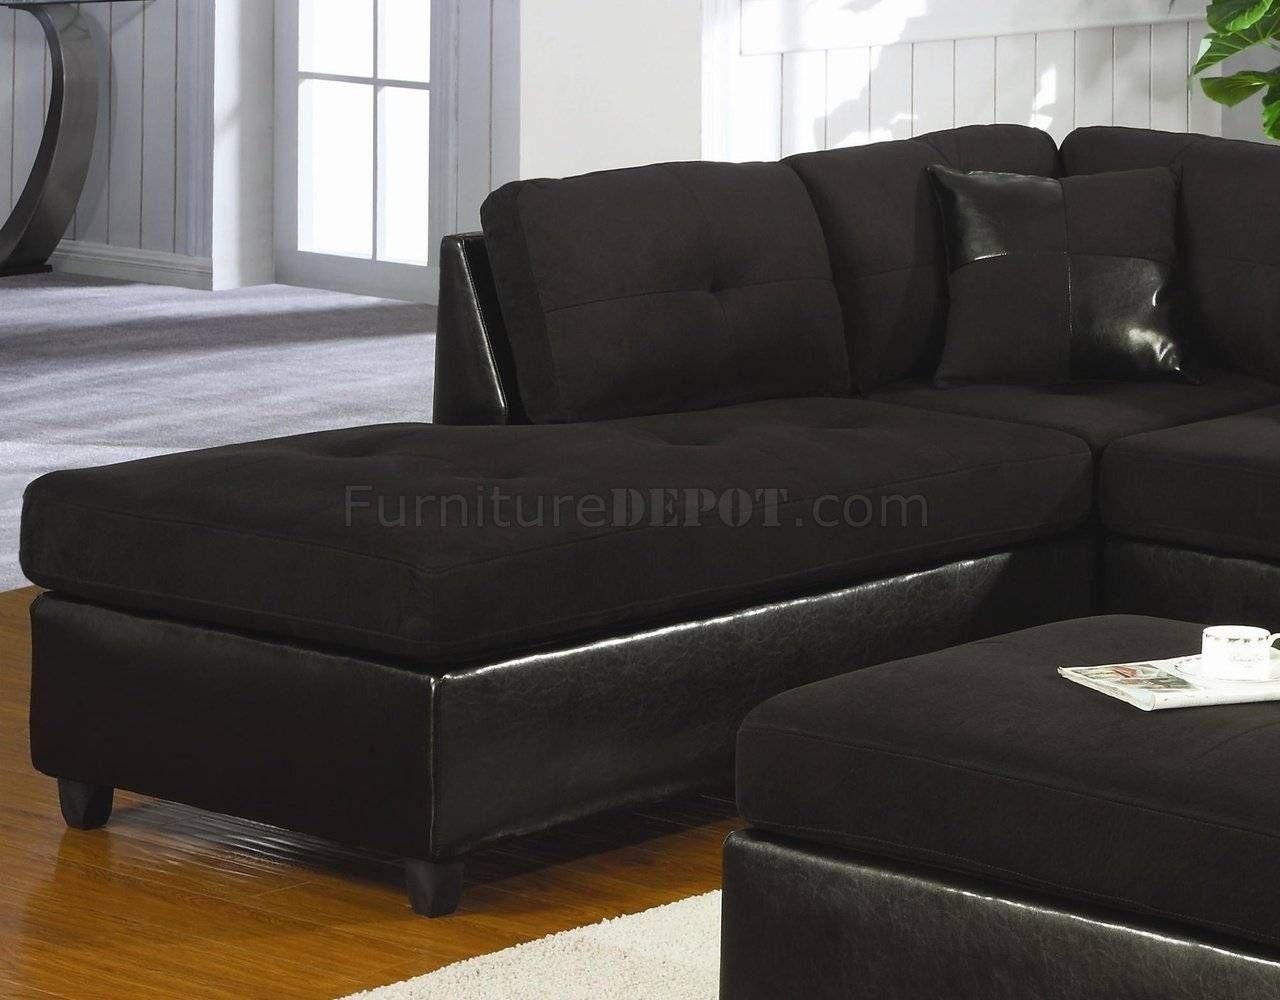 Microfiber & Faux Leather Contemporary Sectional Sofa 500735 Black Inside Black Microfiber Sectional Sofas (View 4 of 15)